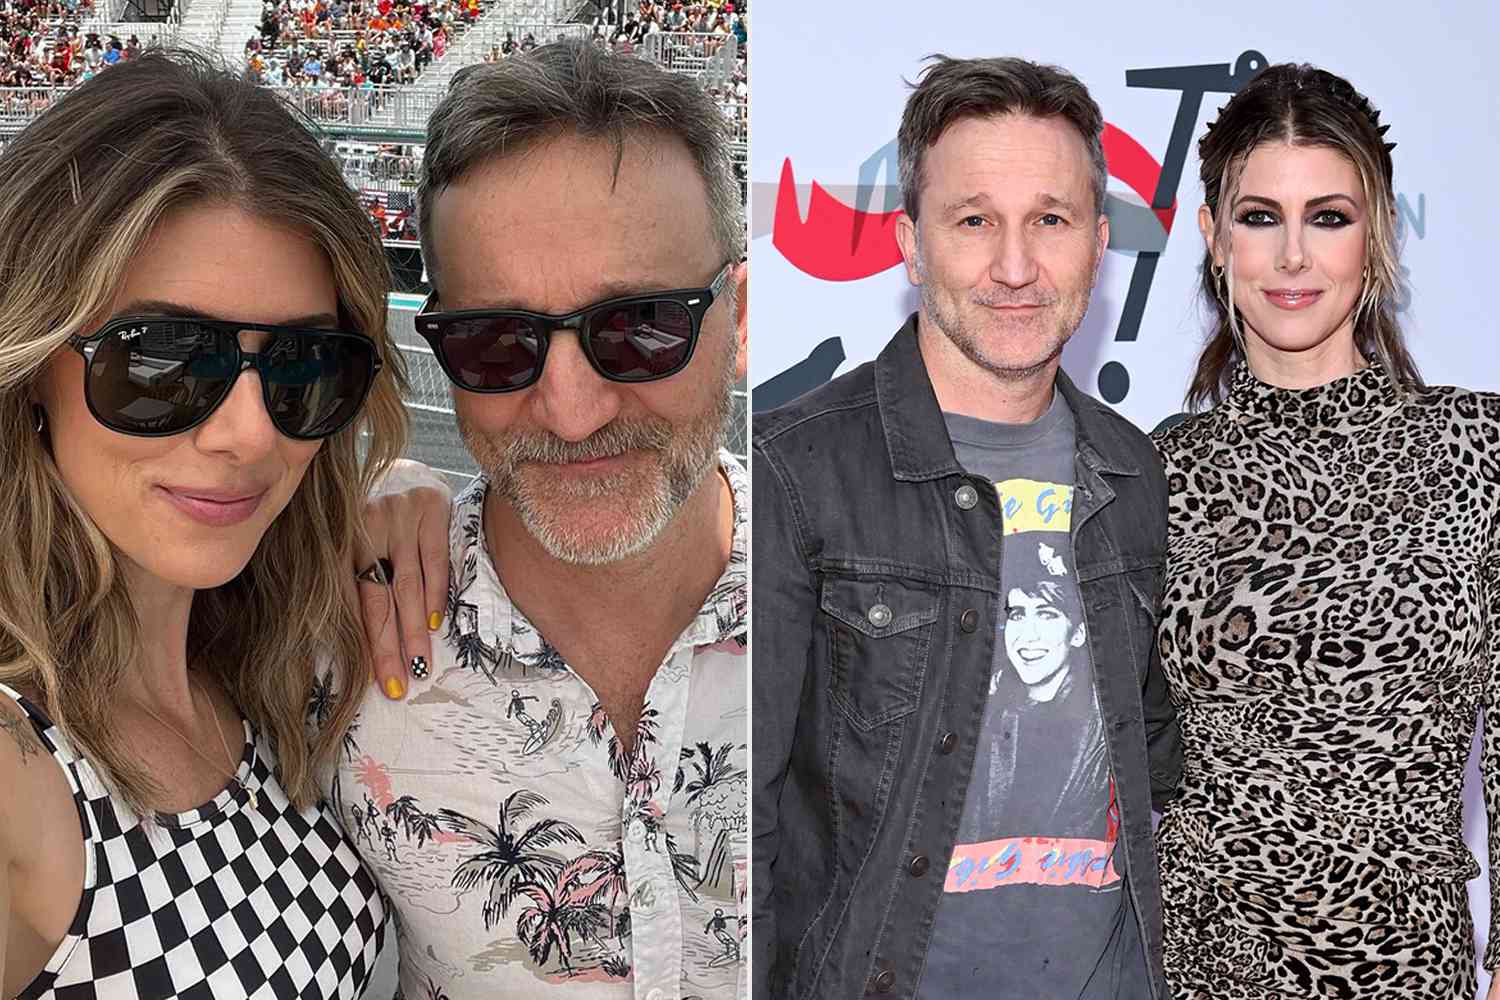 Kelly Rizzo Goes Instagram Official with Breckin Meyer at F1 Miami Grand Prix: ‘Kind, Sweet, Silly’